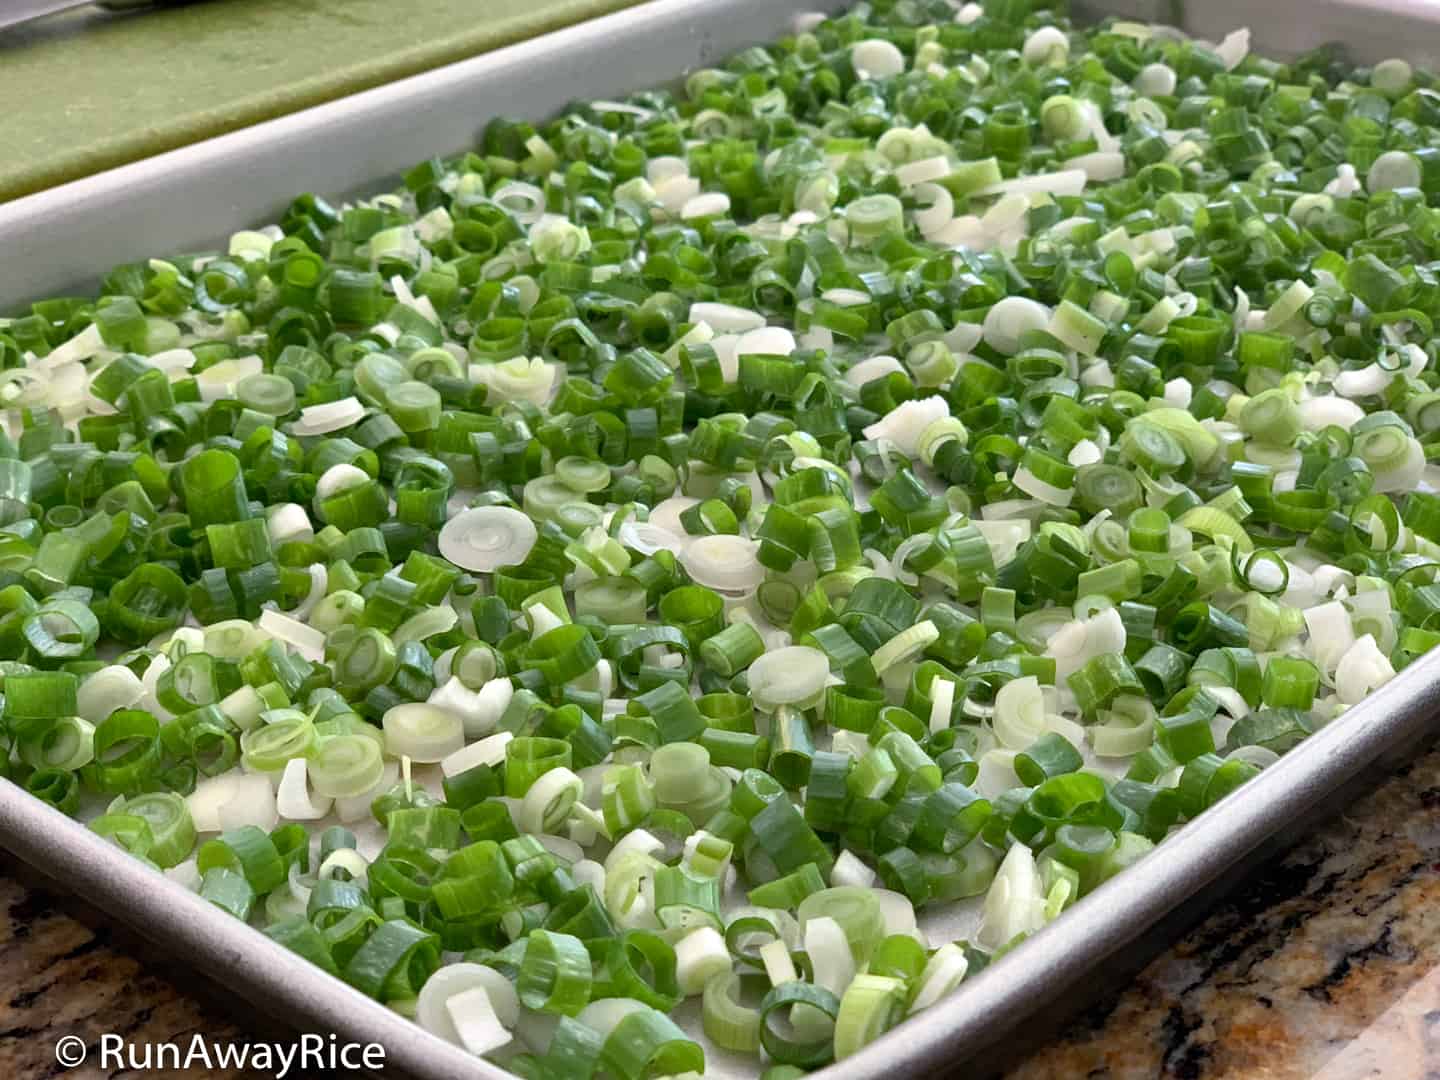 http://runawayrice.com/wp-content/uploads/2018/10/How-To-Freeze-Green-Onions-Spread-Out-Baking-Sheet.jpg